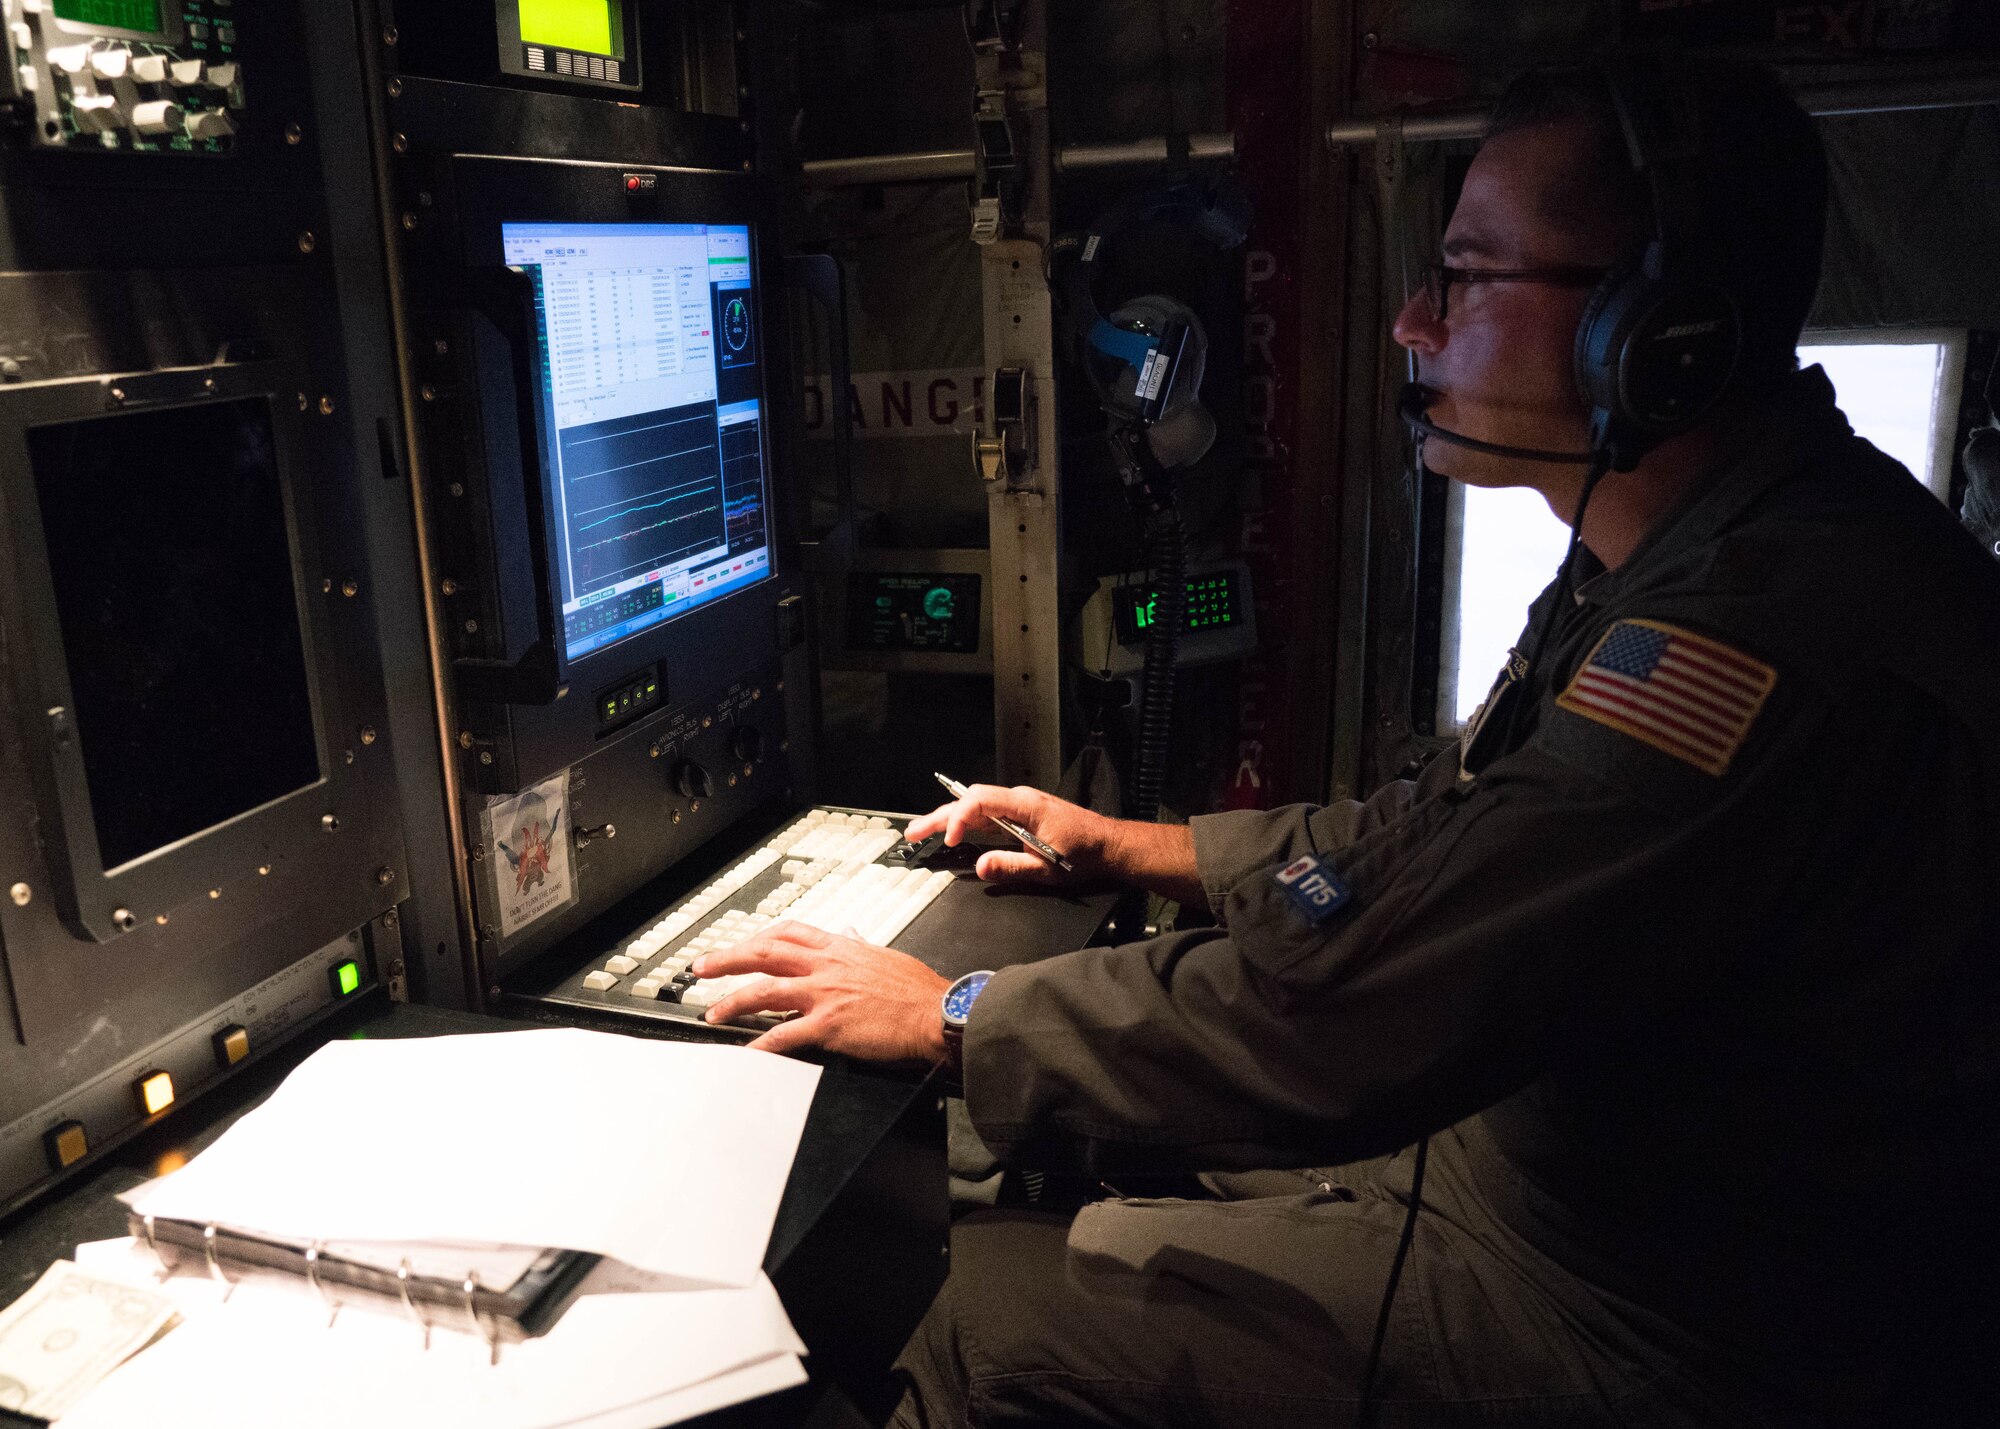 Maj. Douglas Gautrau, aerial reconnaissance weather officer with the 53rd Weather Reconnaissance Squadron, reviews weather data collected during a mission into Hurricane Douglas July 24, 2020. The data is sent to the Central Pacific Hurricane Center to assist with their forecasts. The 53rd WRS, better known as the Air Force Reserve Hurricane Hunters, is assigned to the 403rd Wing at Keesler Air Force Base, Mississippi. Crews departed the base July 22 and started conduct operations out of Barbers Point Kapolie Airport, Hawaii, July 24, 2020. (U.S. Air Force photo by Lt. Col. Marnee A.C. Losurdo)